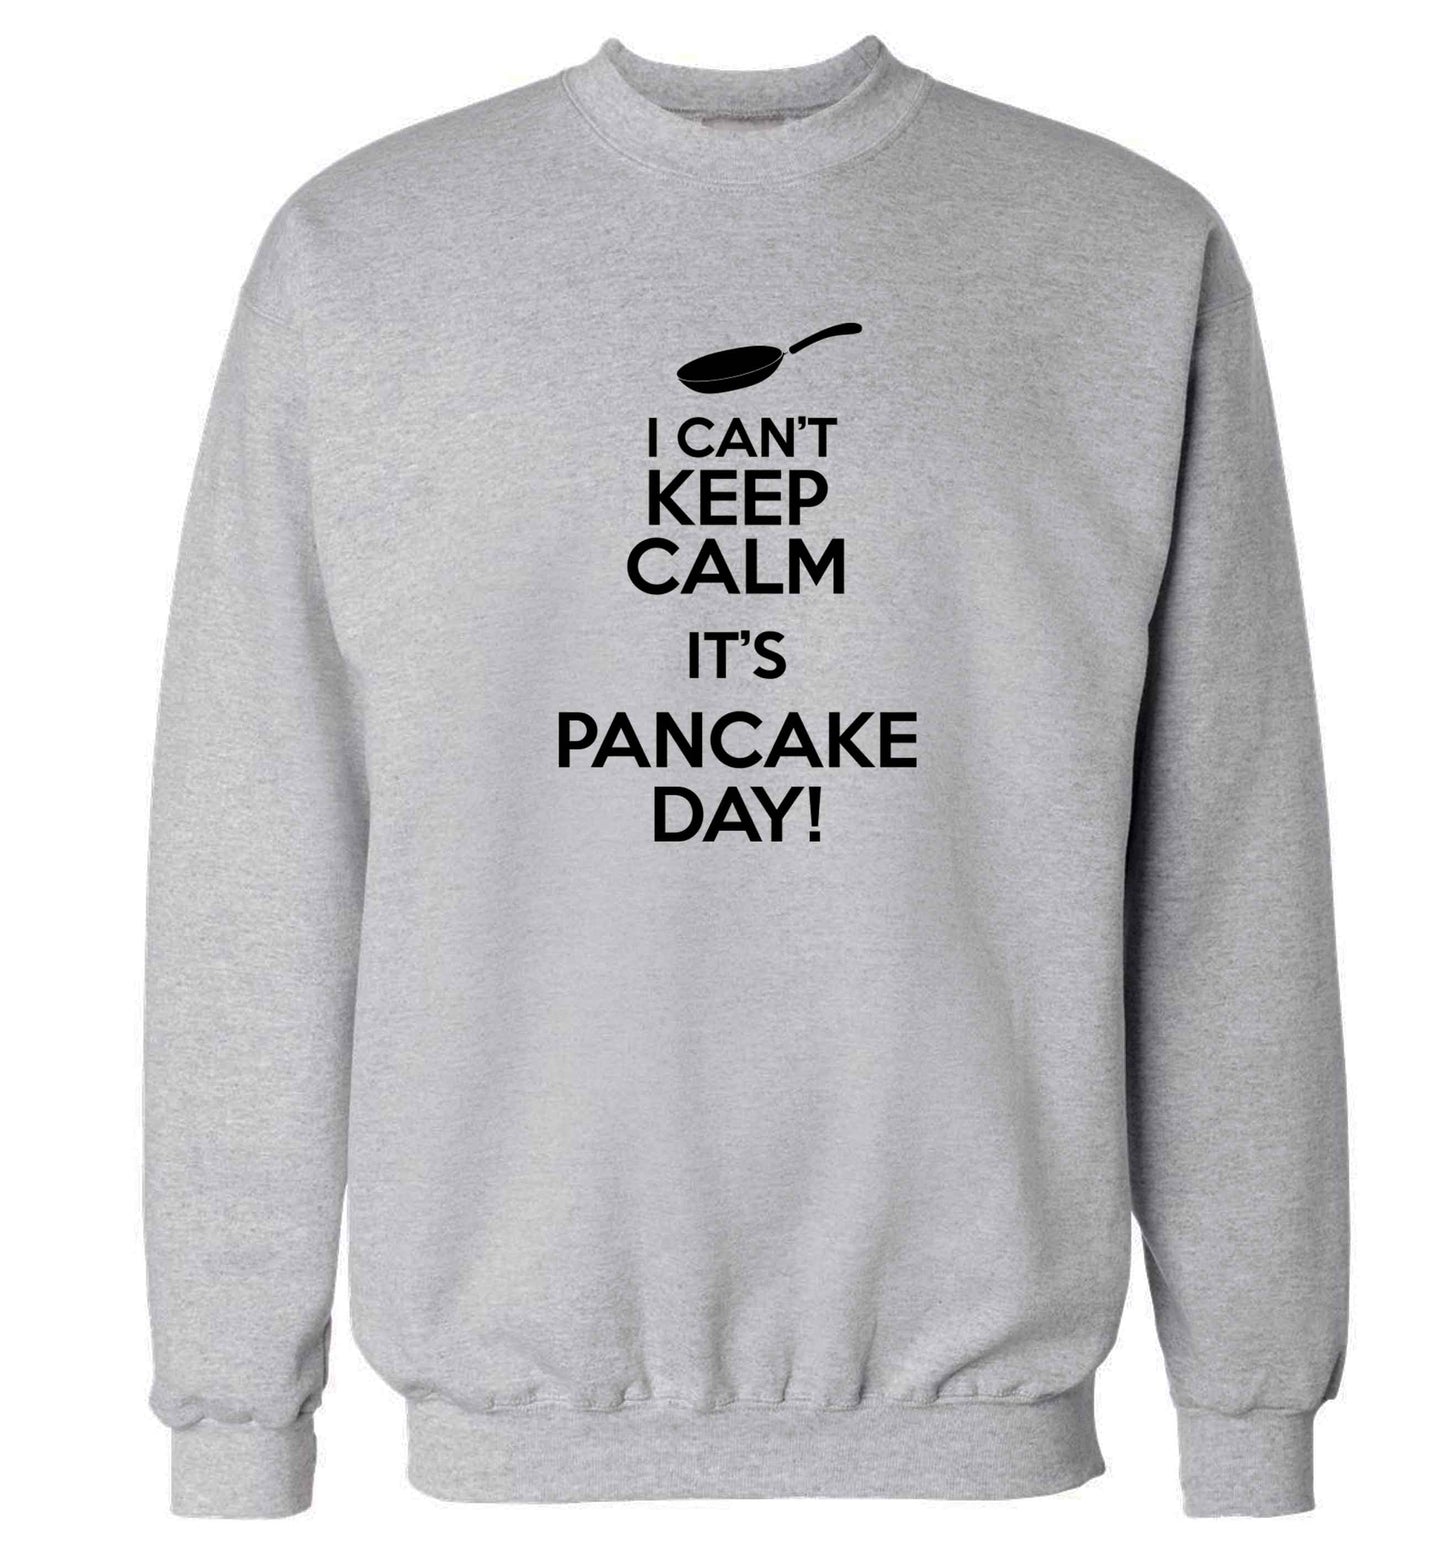 I can't keep calm it's pancake day! adult's unisex grey sweater 2XL